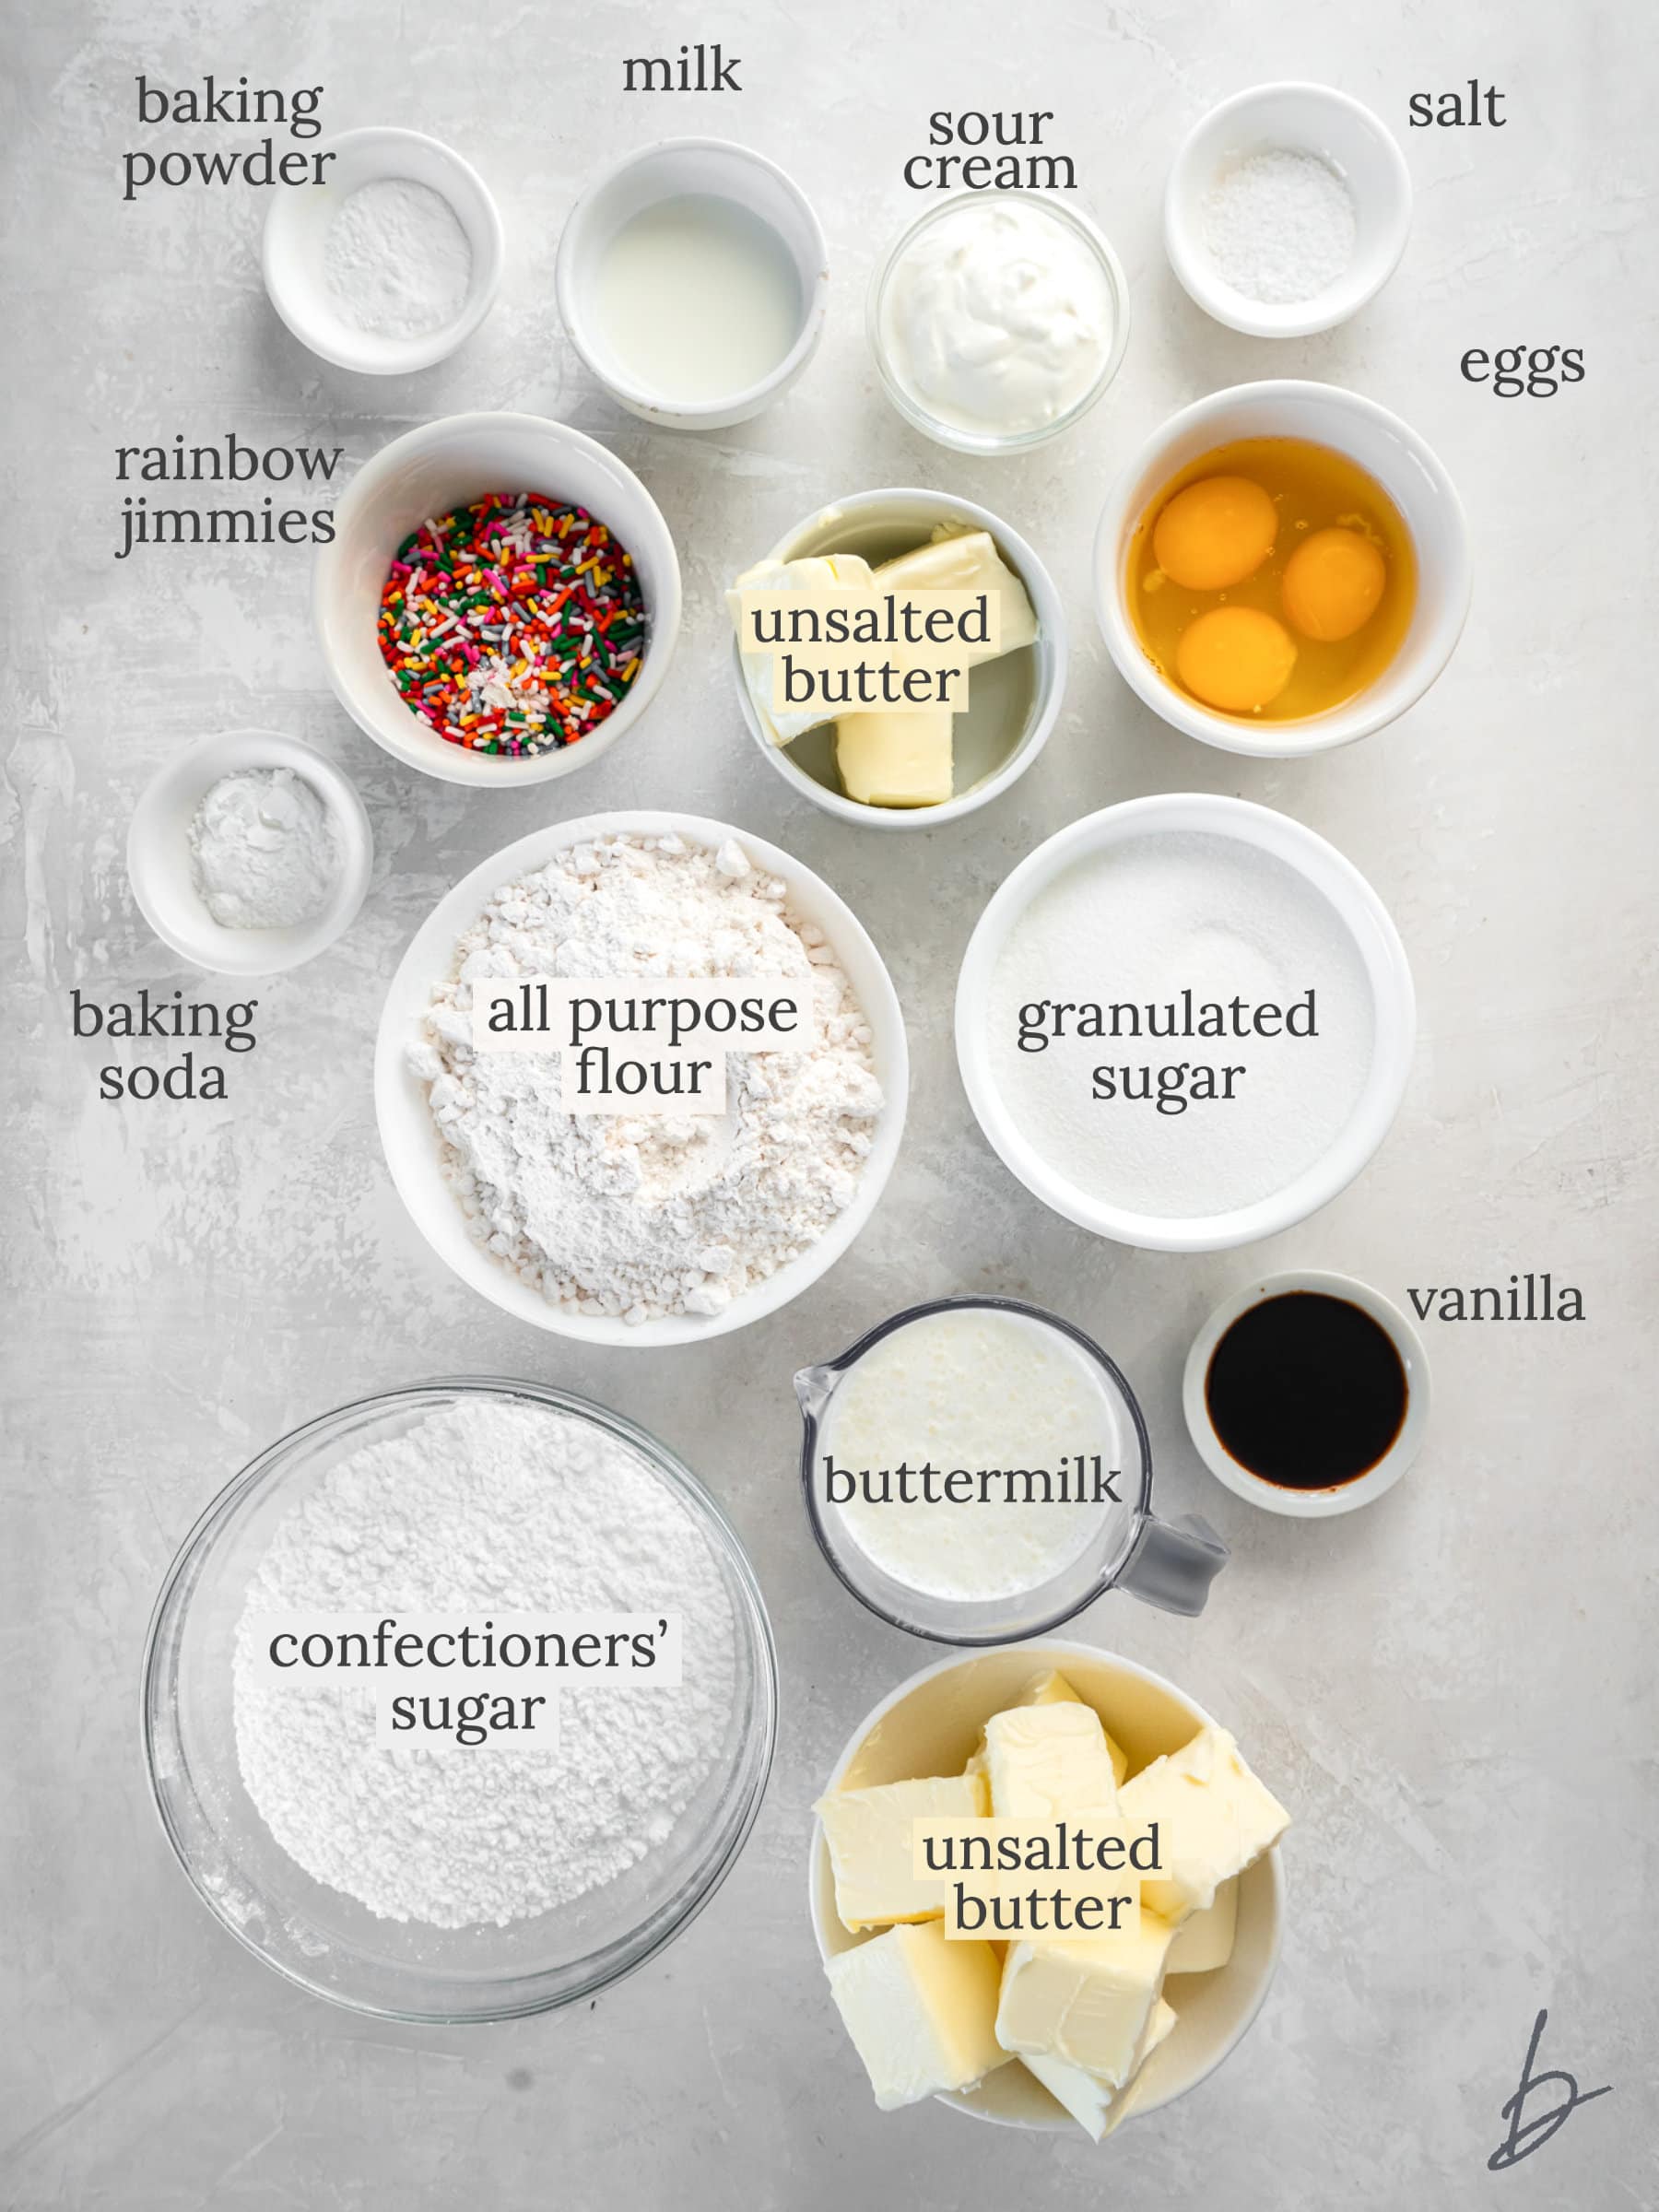 funfetti cake ingredients in bowls labeled with text.